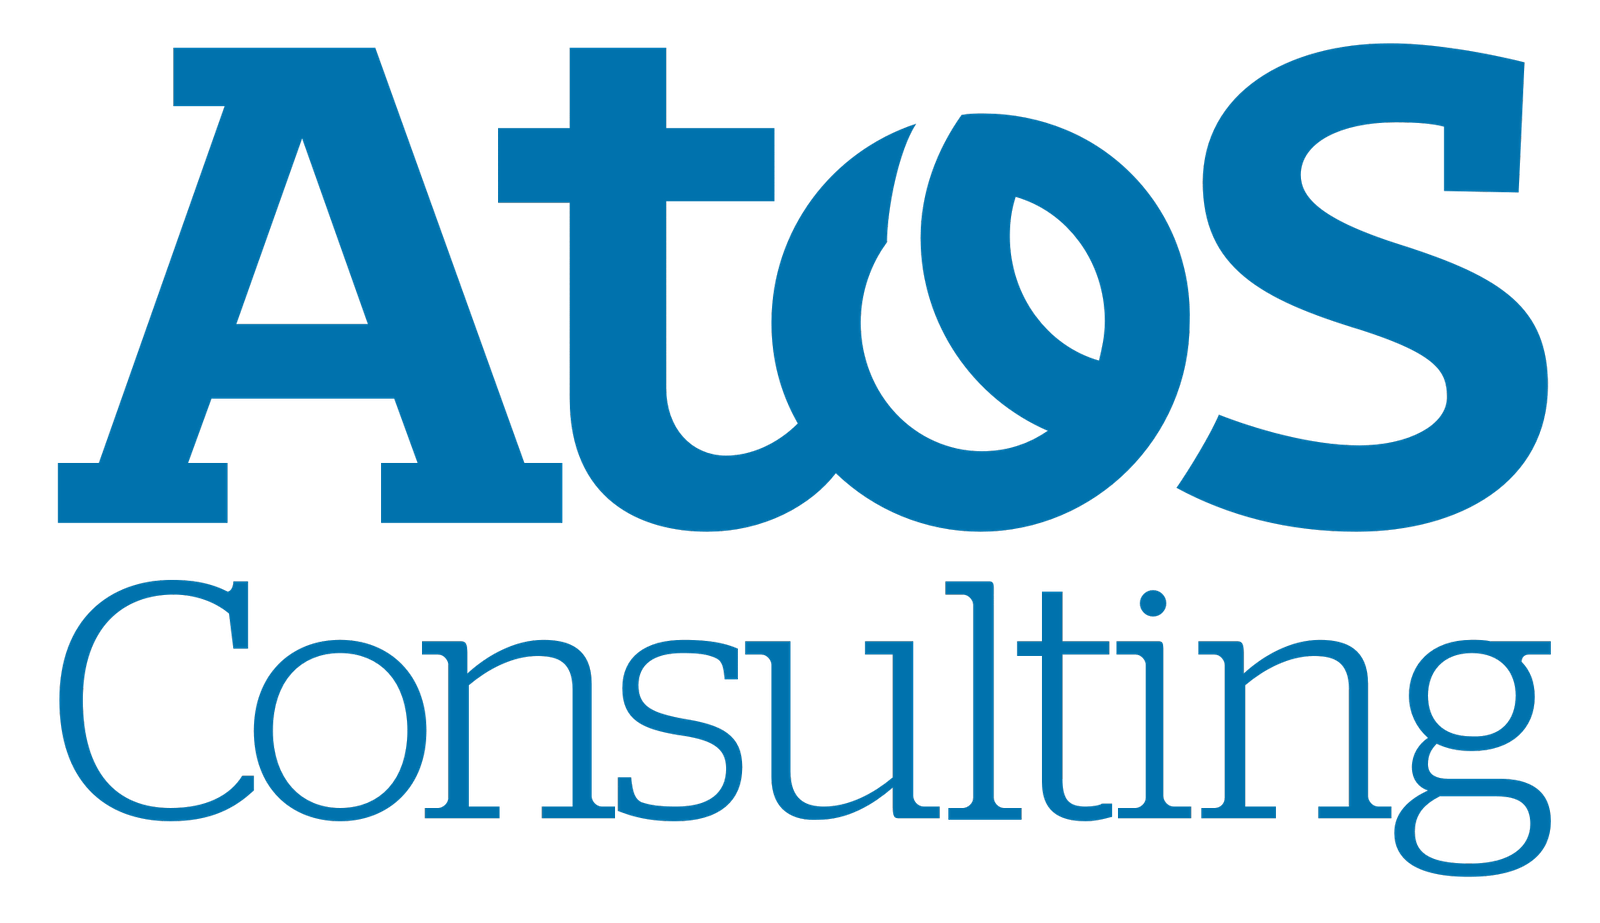 Whether project, process or change management, with Atos you have a strong consulting partner at your side who also has a great deal of technical know-how and can therefore accompany you all the way to the implementation of our patient portal.